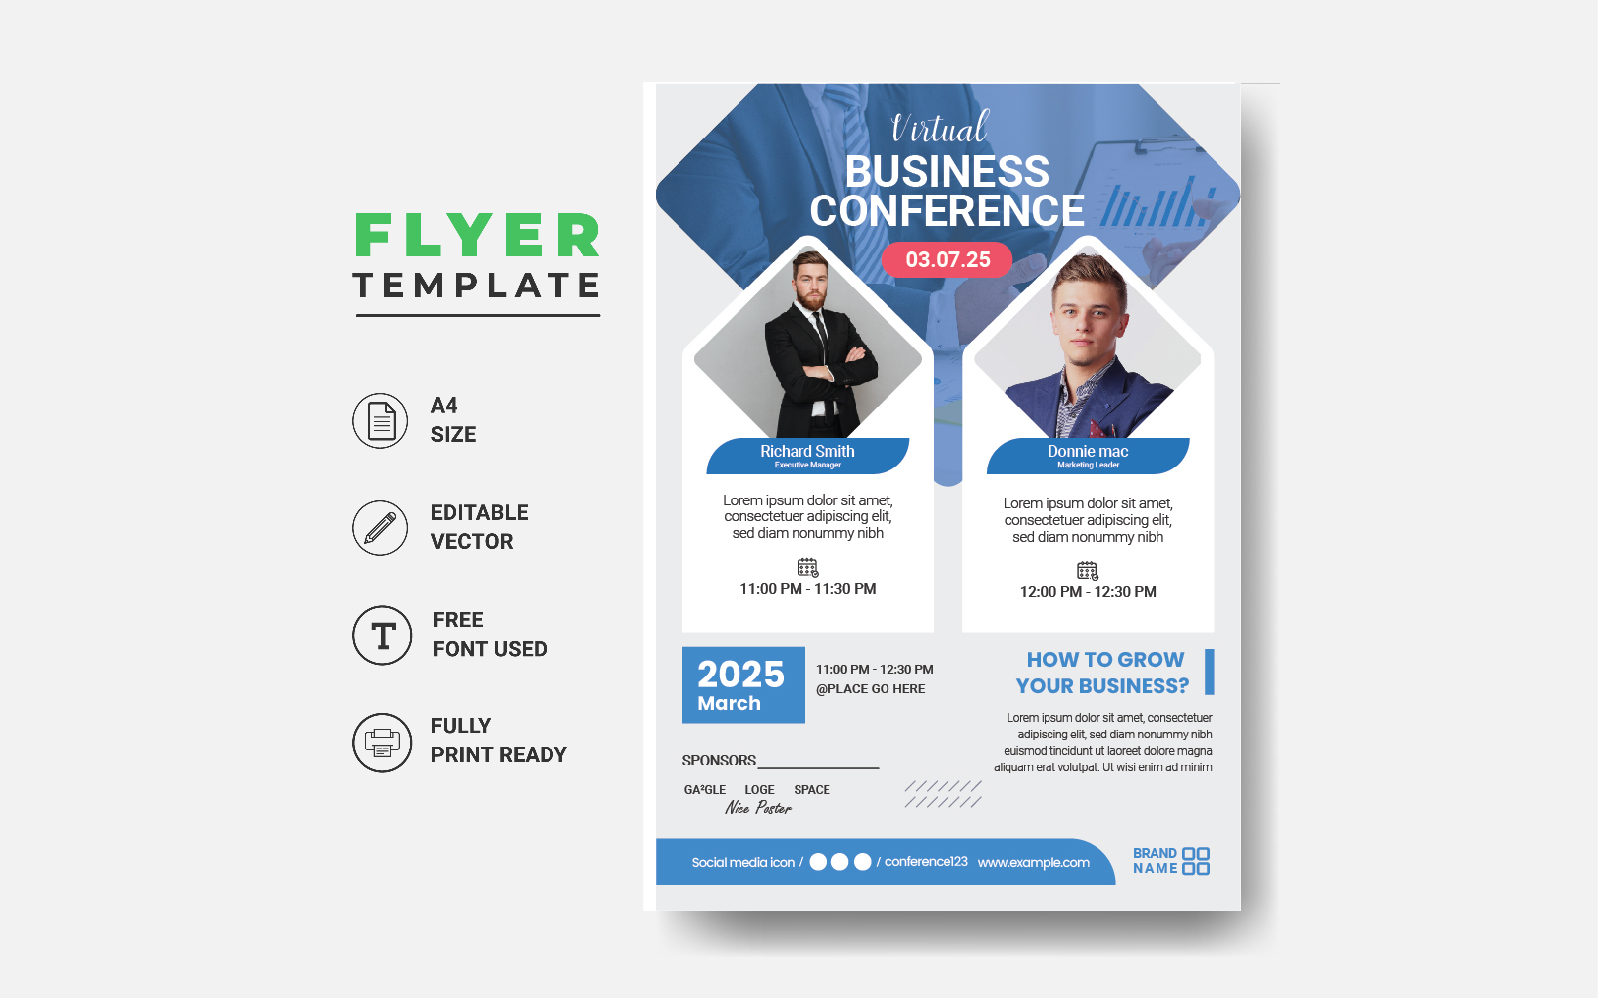 Business Conference Brochure Flyer Design Layout Template In A4 Size, Virtual Business